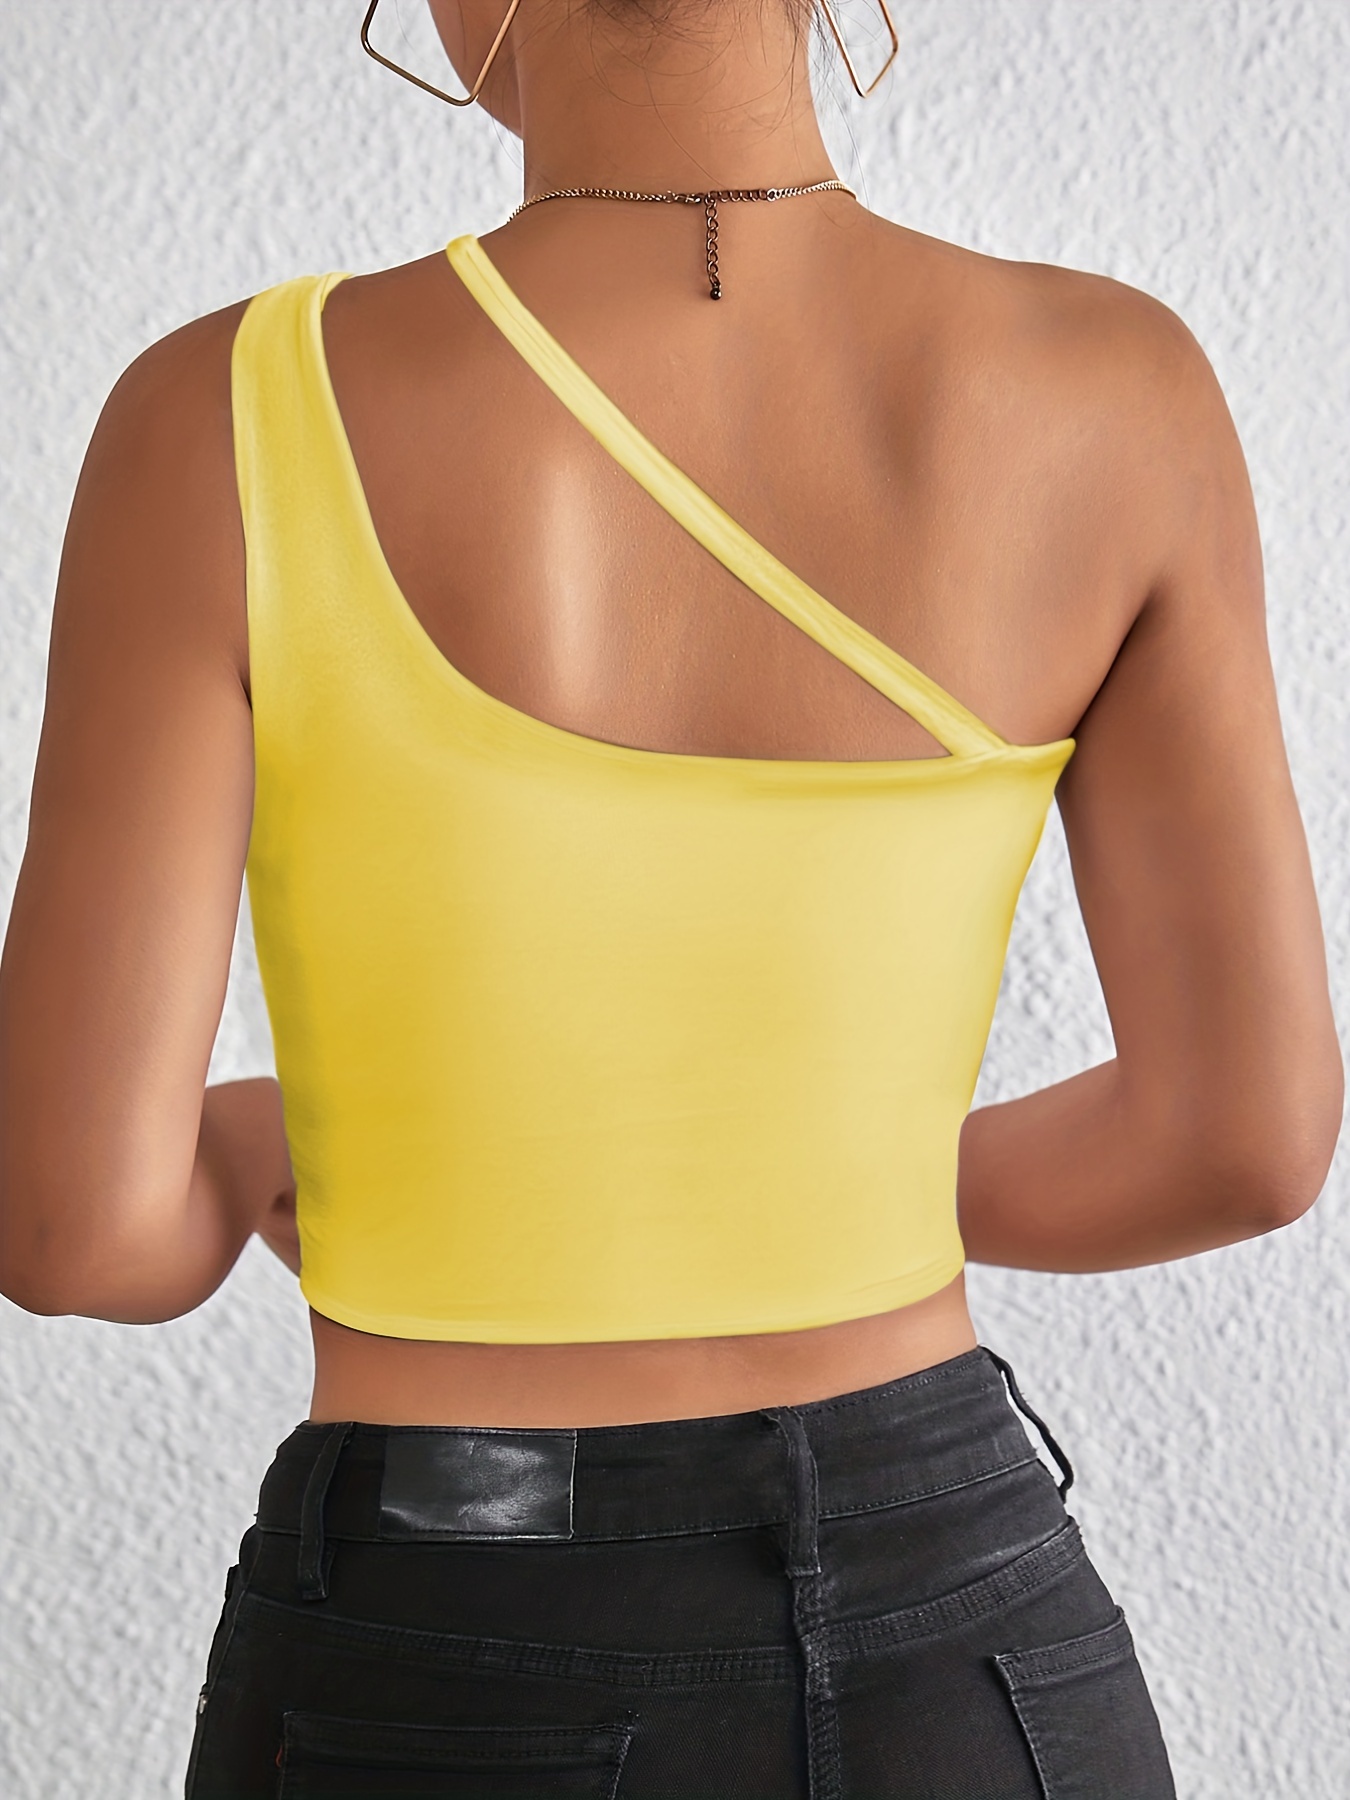 Denim Summer Single Breasted Strapless Crop Top — YELLOW SUB TRADING